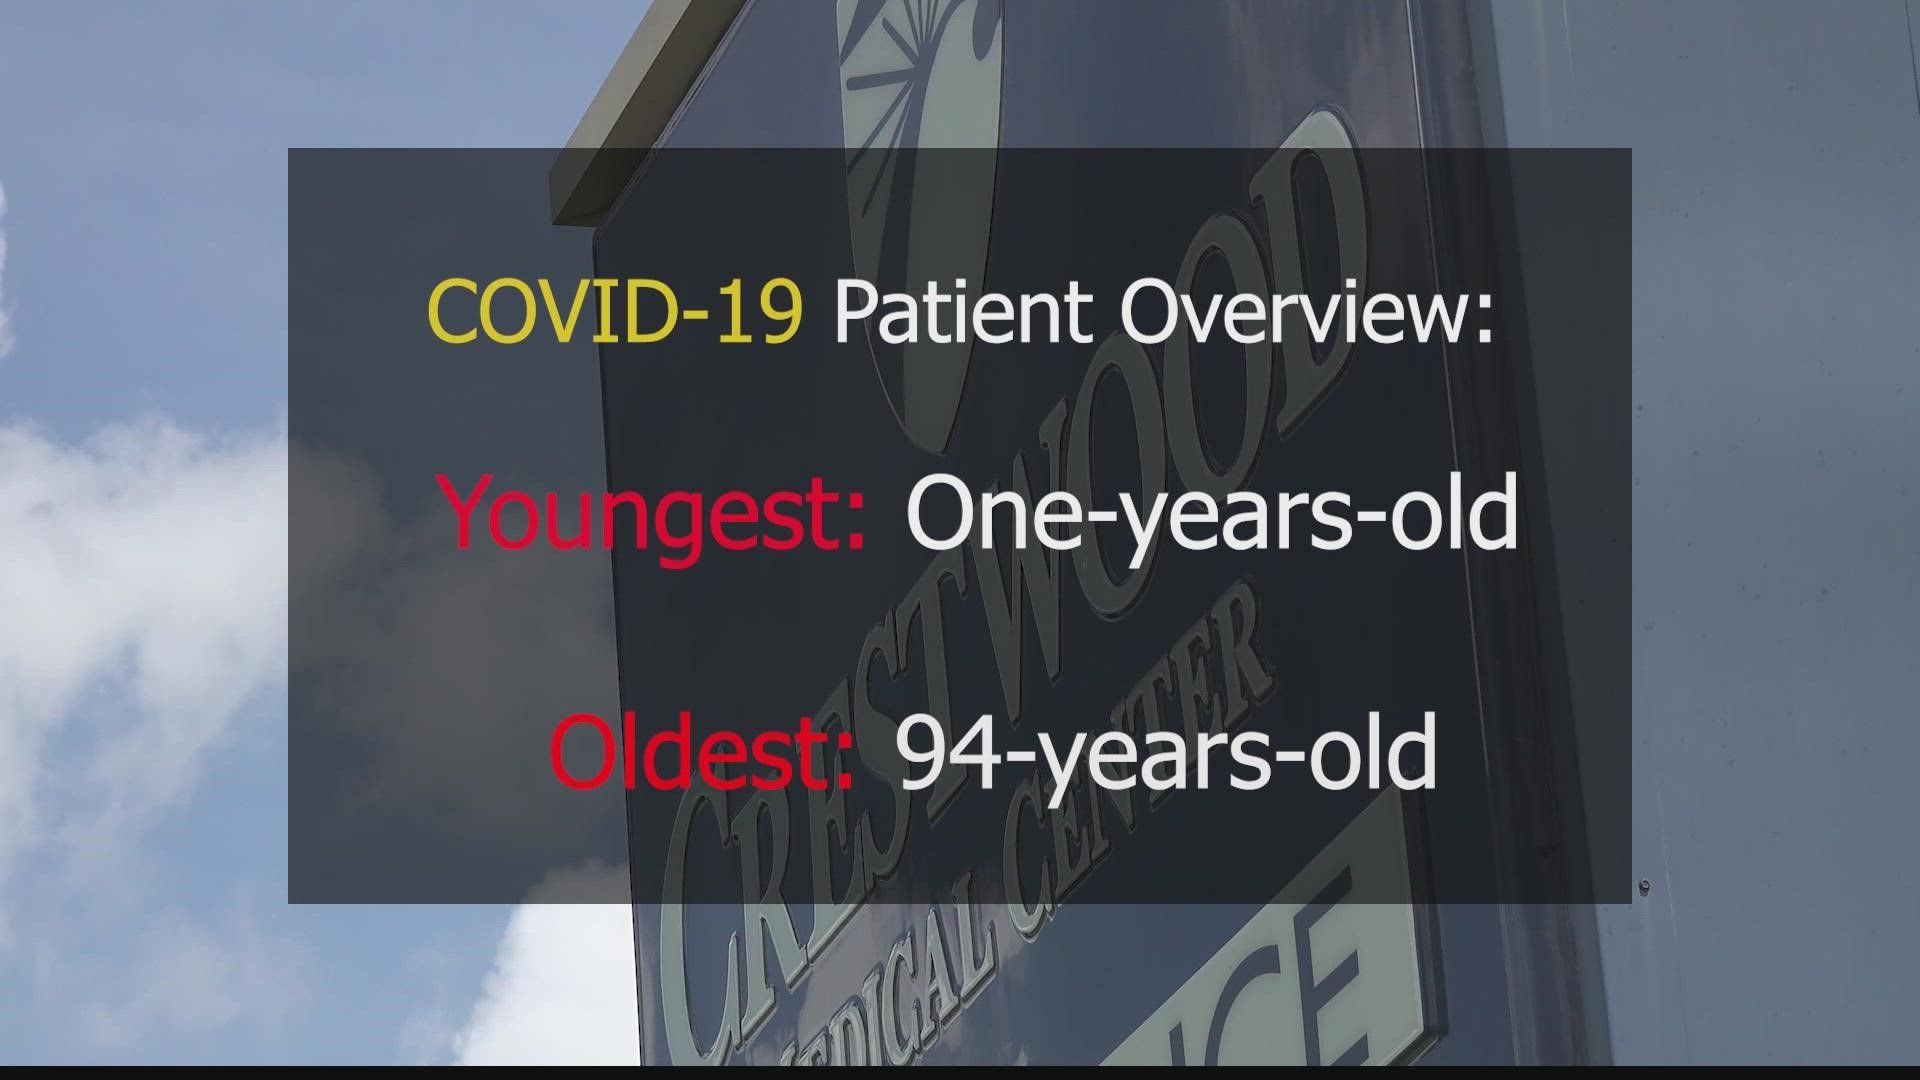 Between Huntsville Hospital and Crestwood Medical Center, there have been 15 COVID-related deaths in just two days.